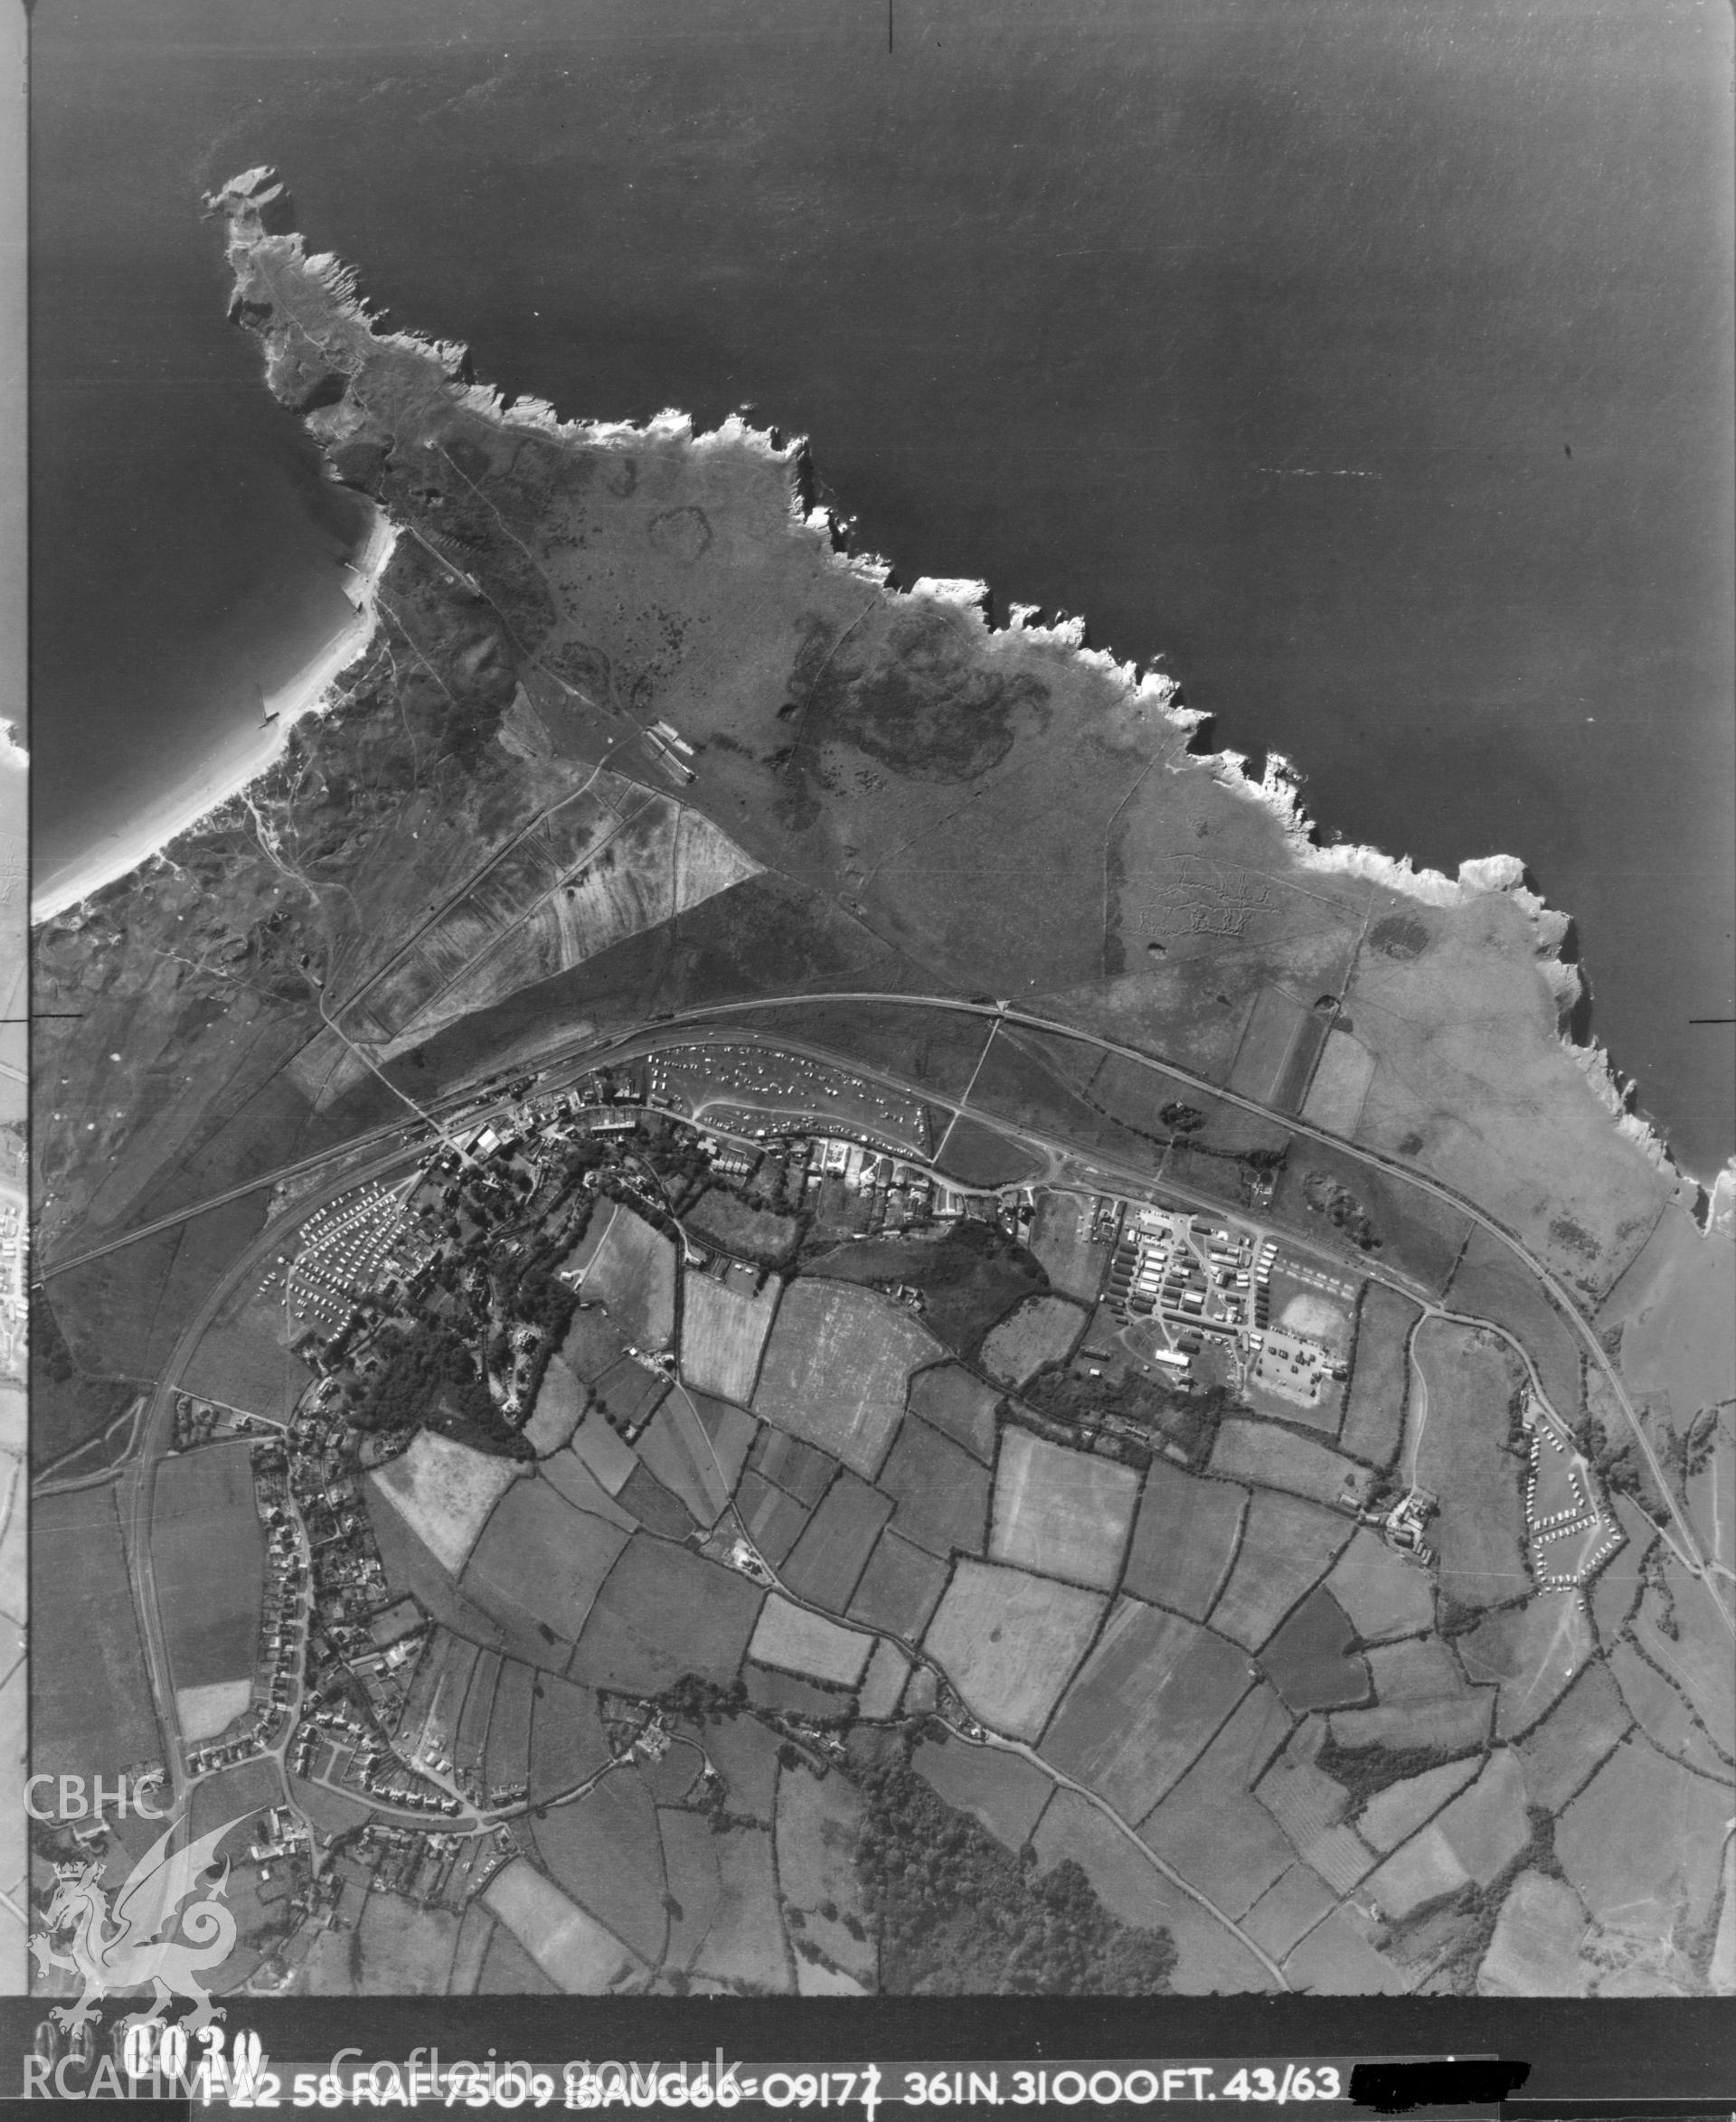 Black and white vertical aerial photograph of the Penally area, taken by RAF 1966.